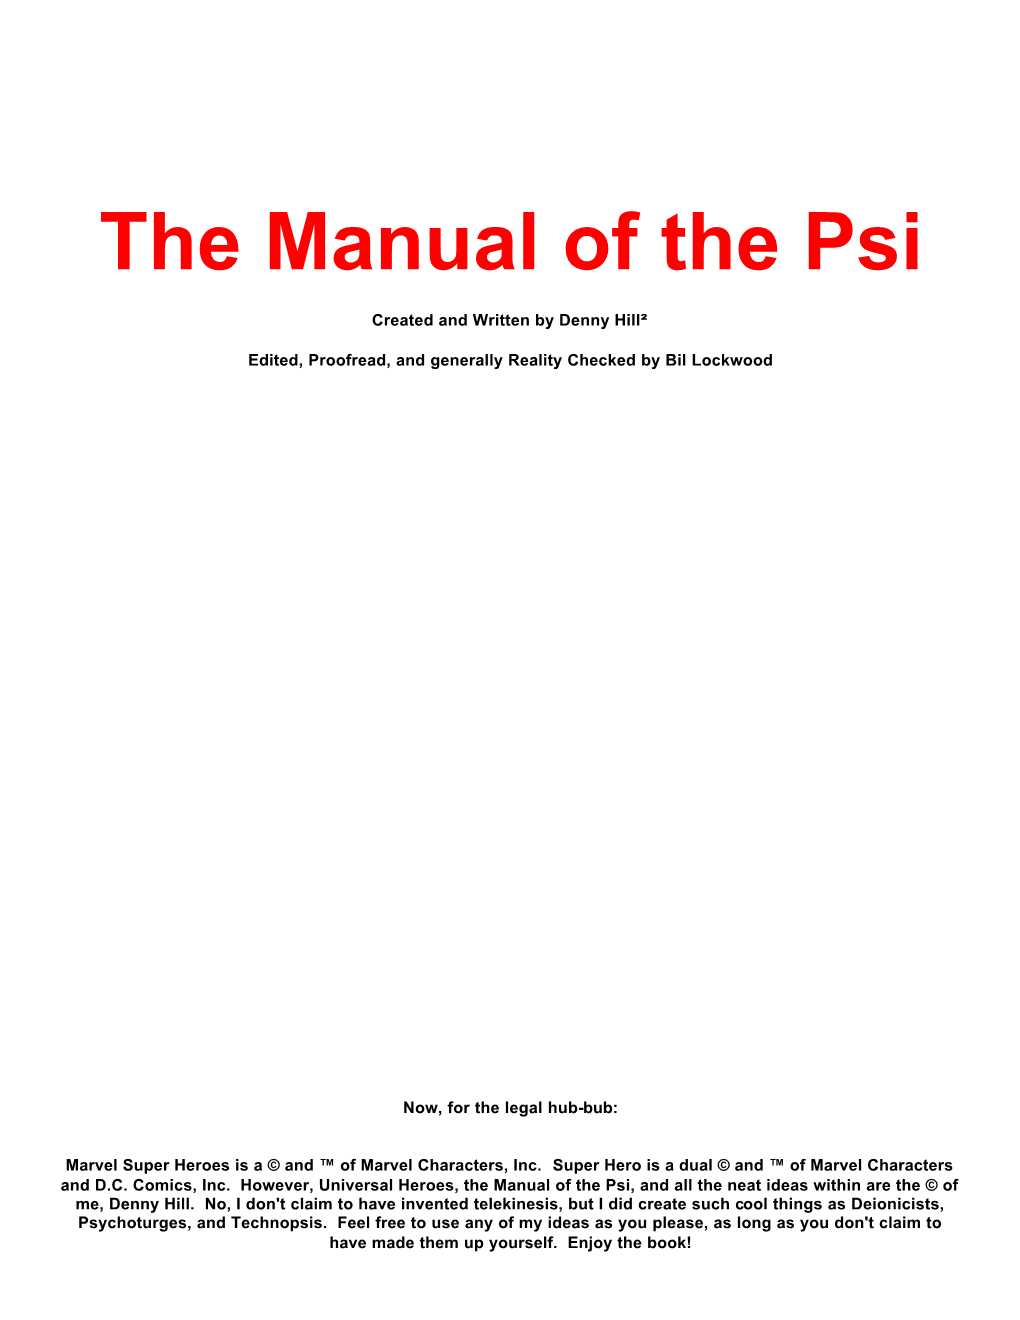 Manual of the Psi